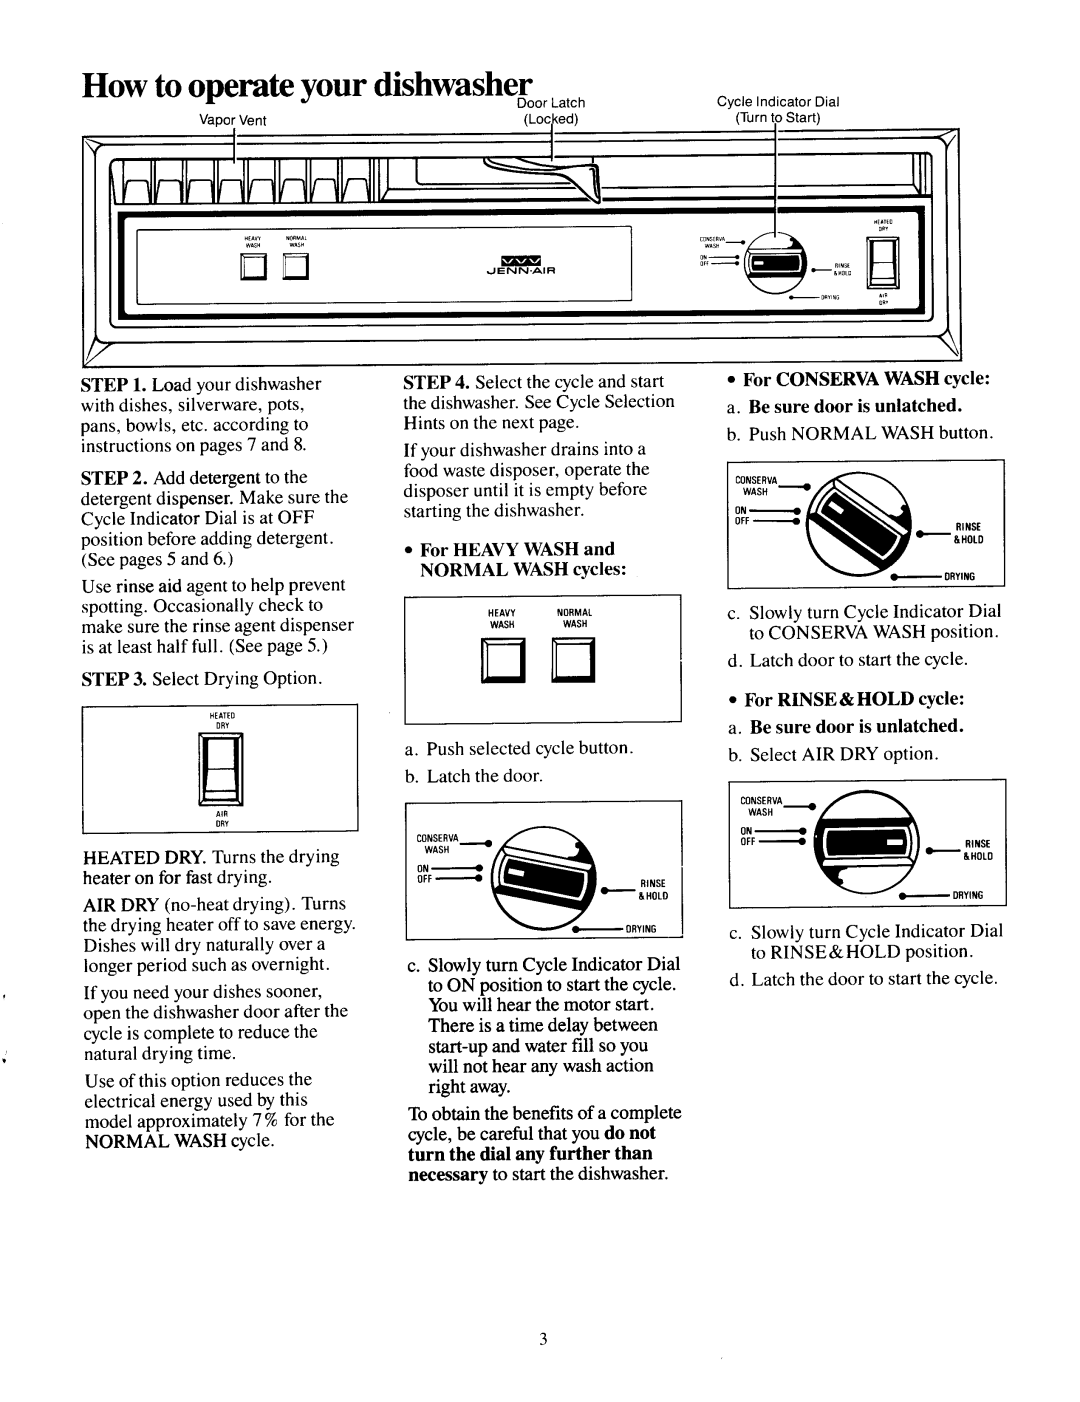 Jenn-Air DU430 manual How to operate your dishwasherDoor Latch, HHHk HHHHI;t, Rinse, Hold, Off, Rims 